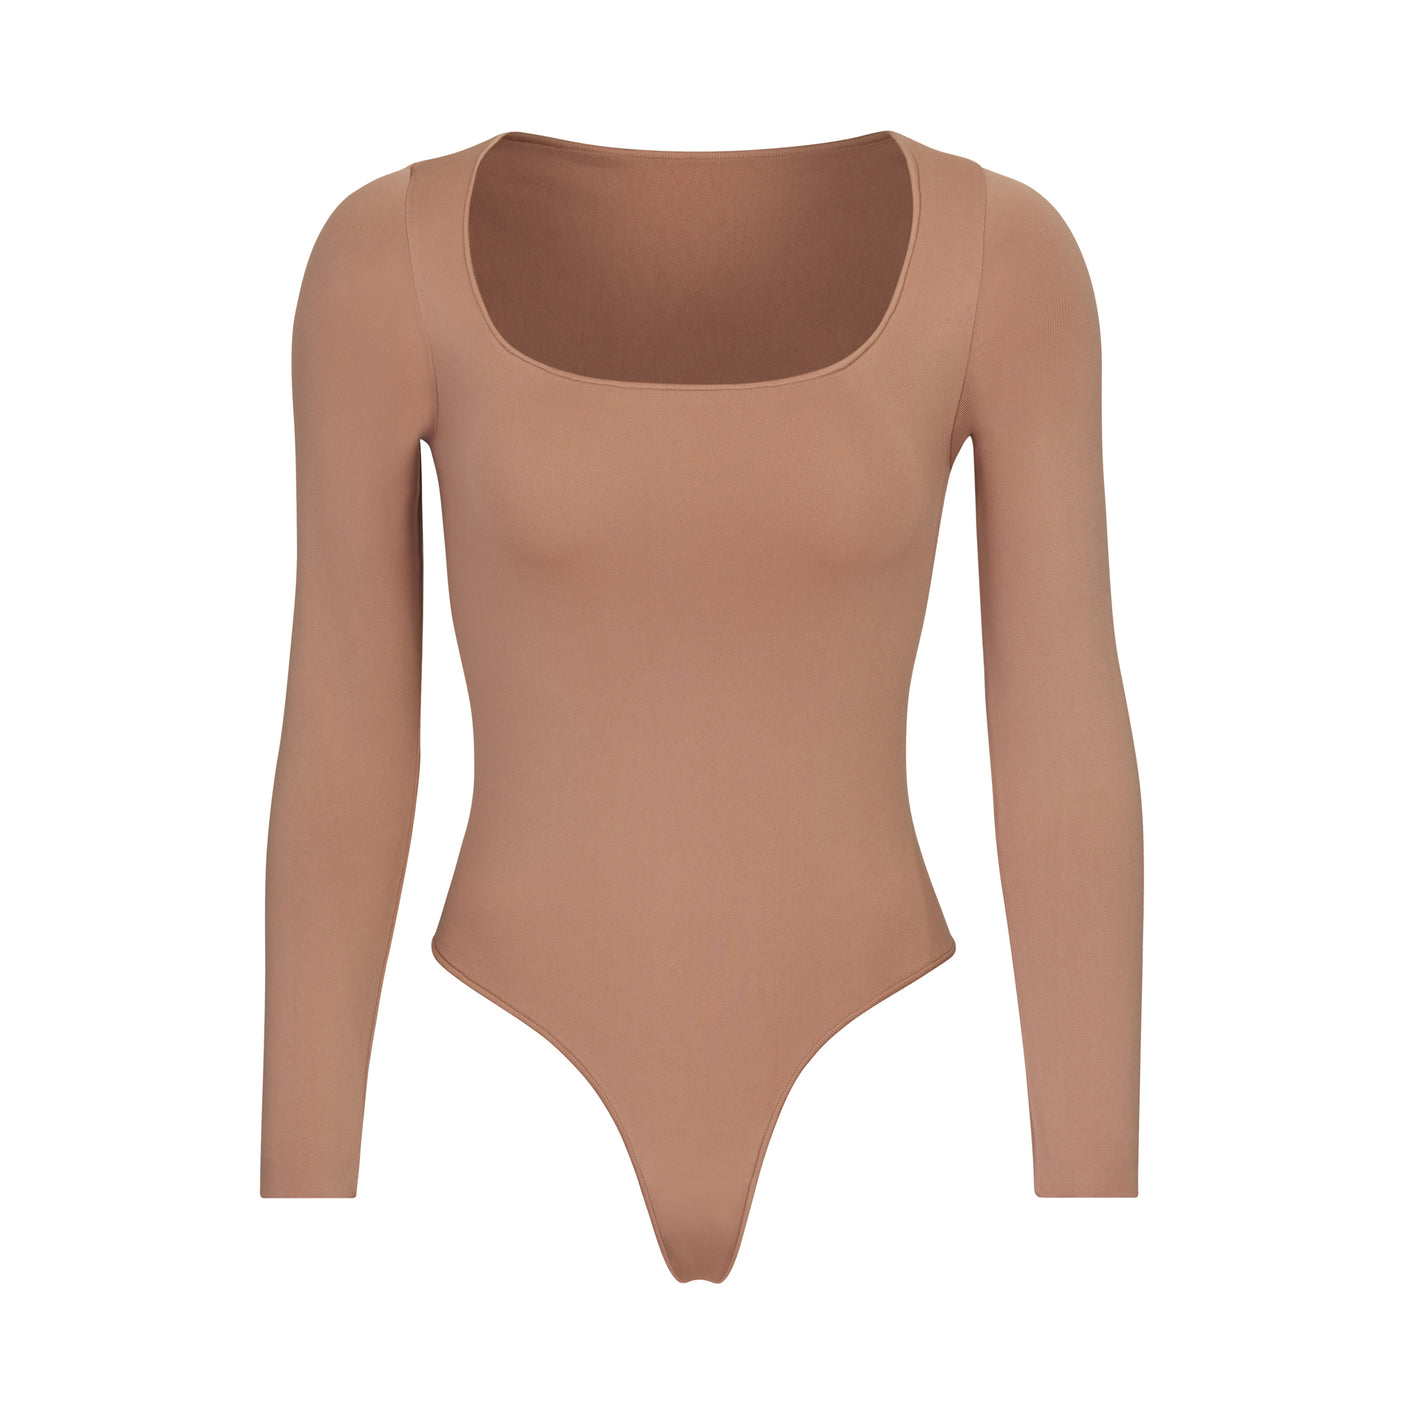  Long Sleeve Bodysuit For Women Sexy Scoop Neck Tops Nude Body  Suits Womens Fashion Semolina X-Small